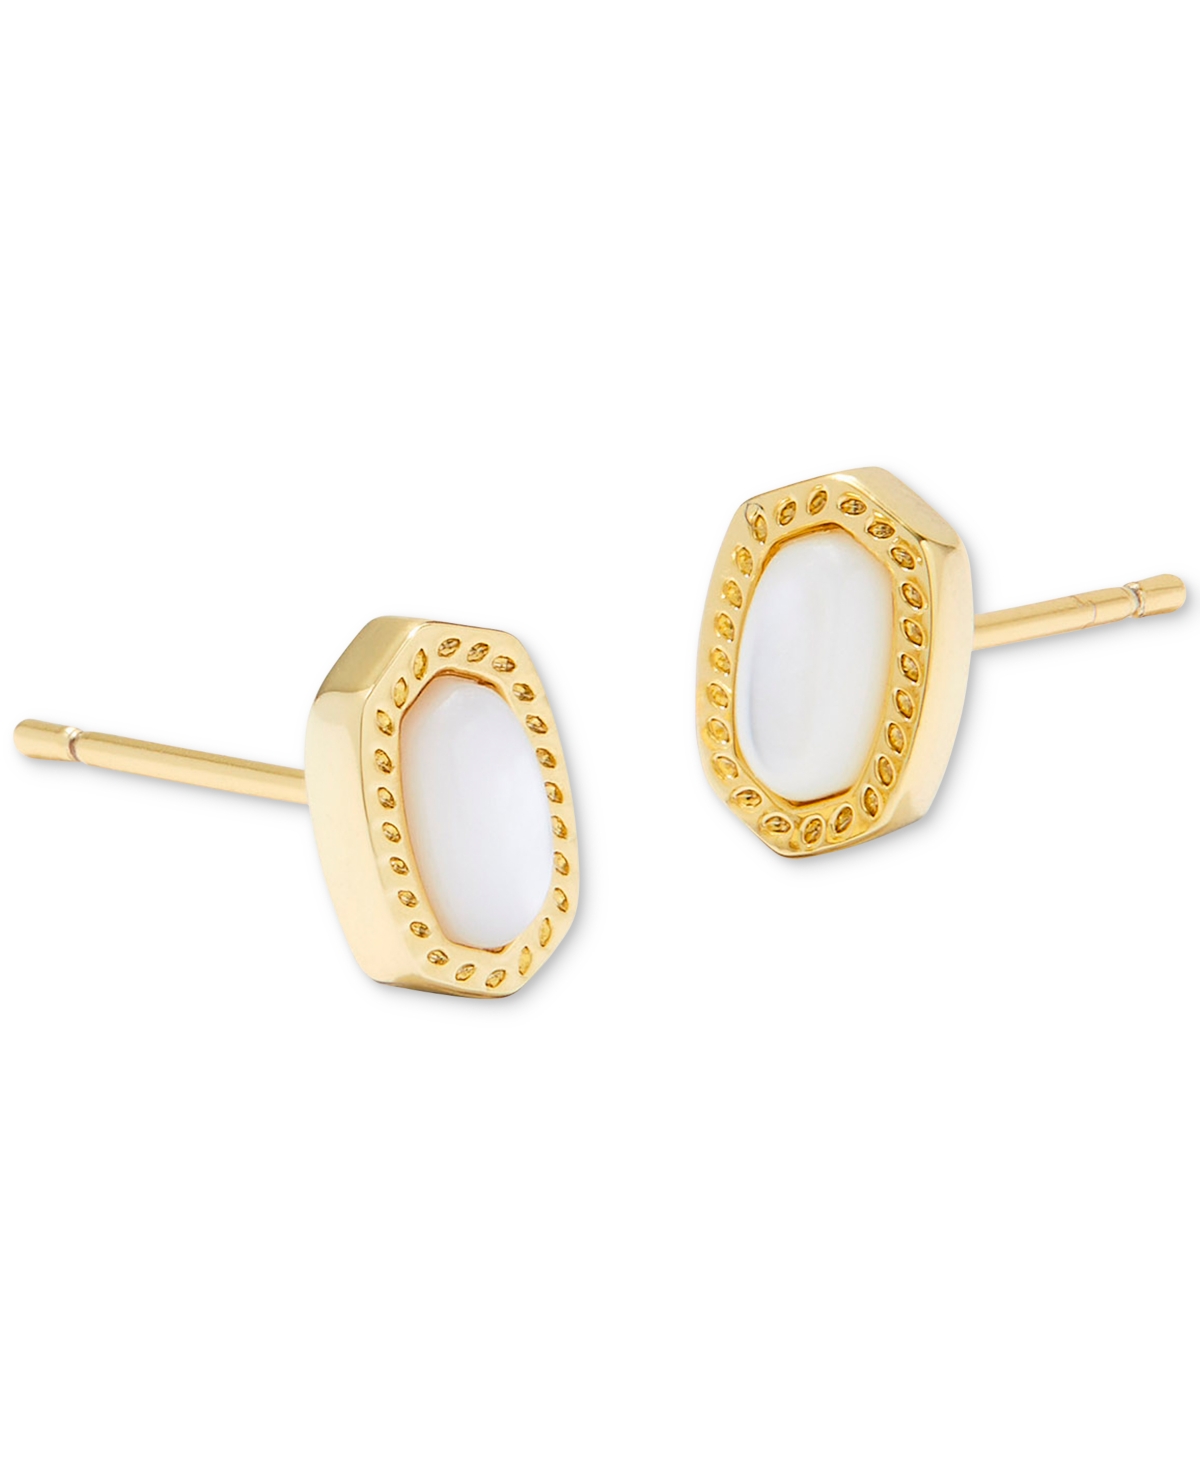 Kendra Scott 14k Gold-plated Oval Stone Stud Earrings In Ivory Mother Of Pearl